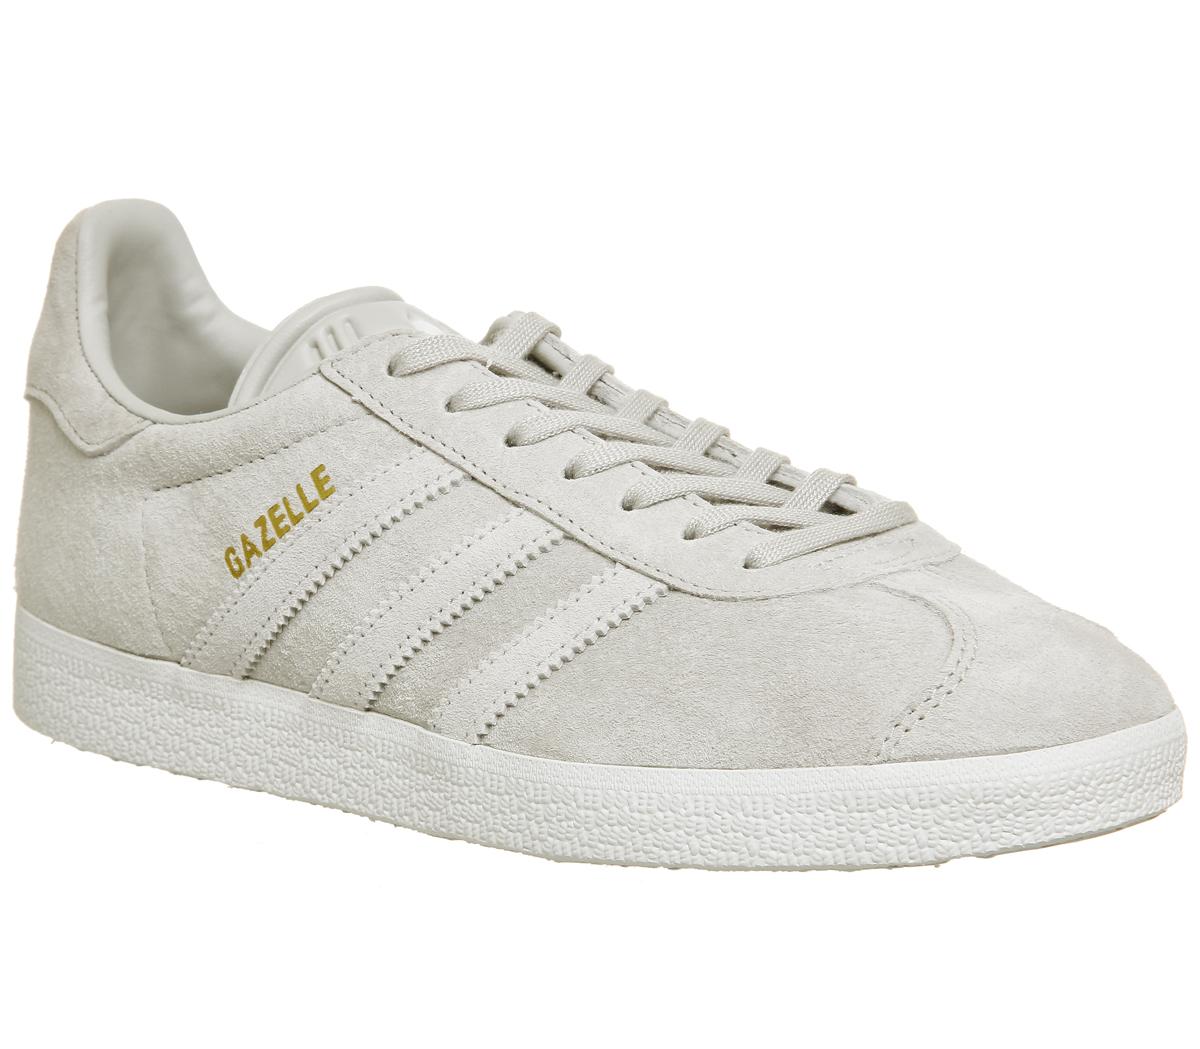 adidas gazelle trainers squeaking